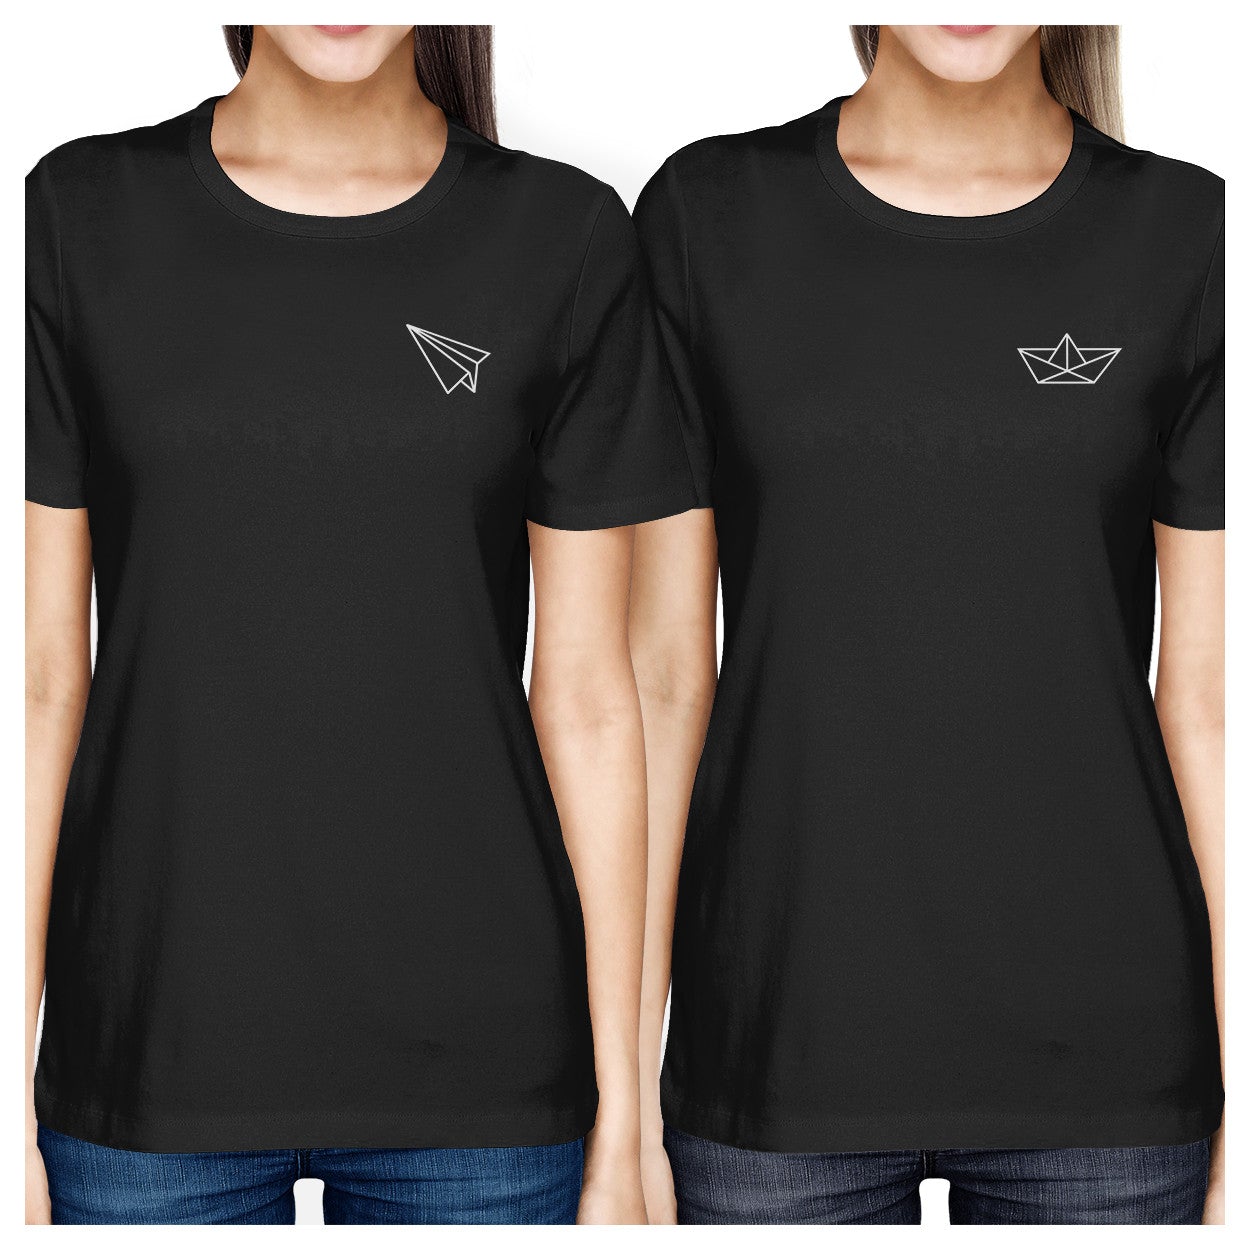 Origami Plane And Boat BFF Matching Black Shirts